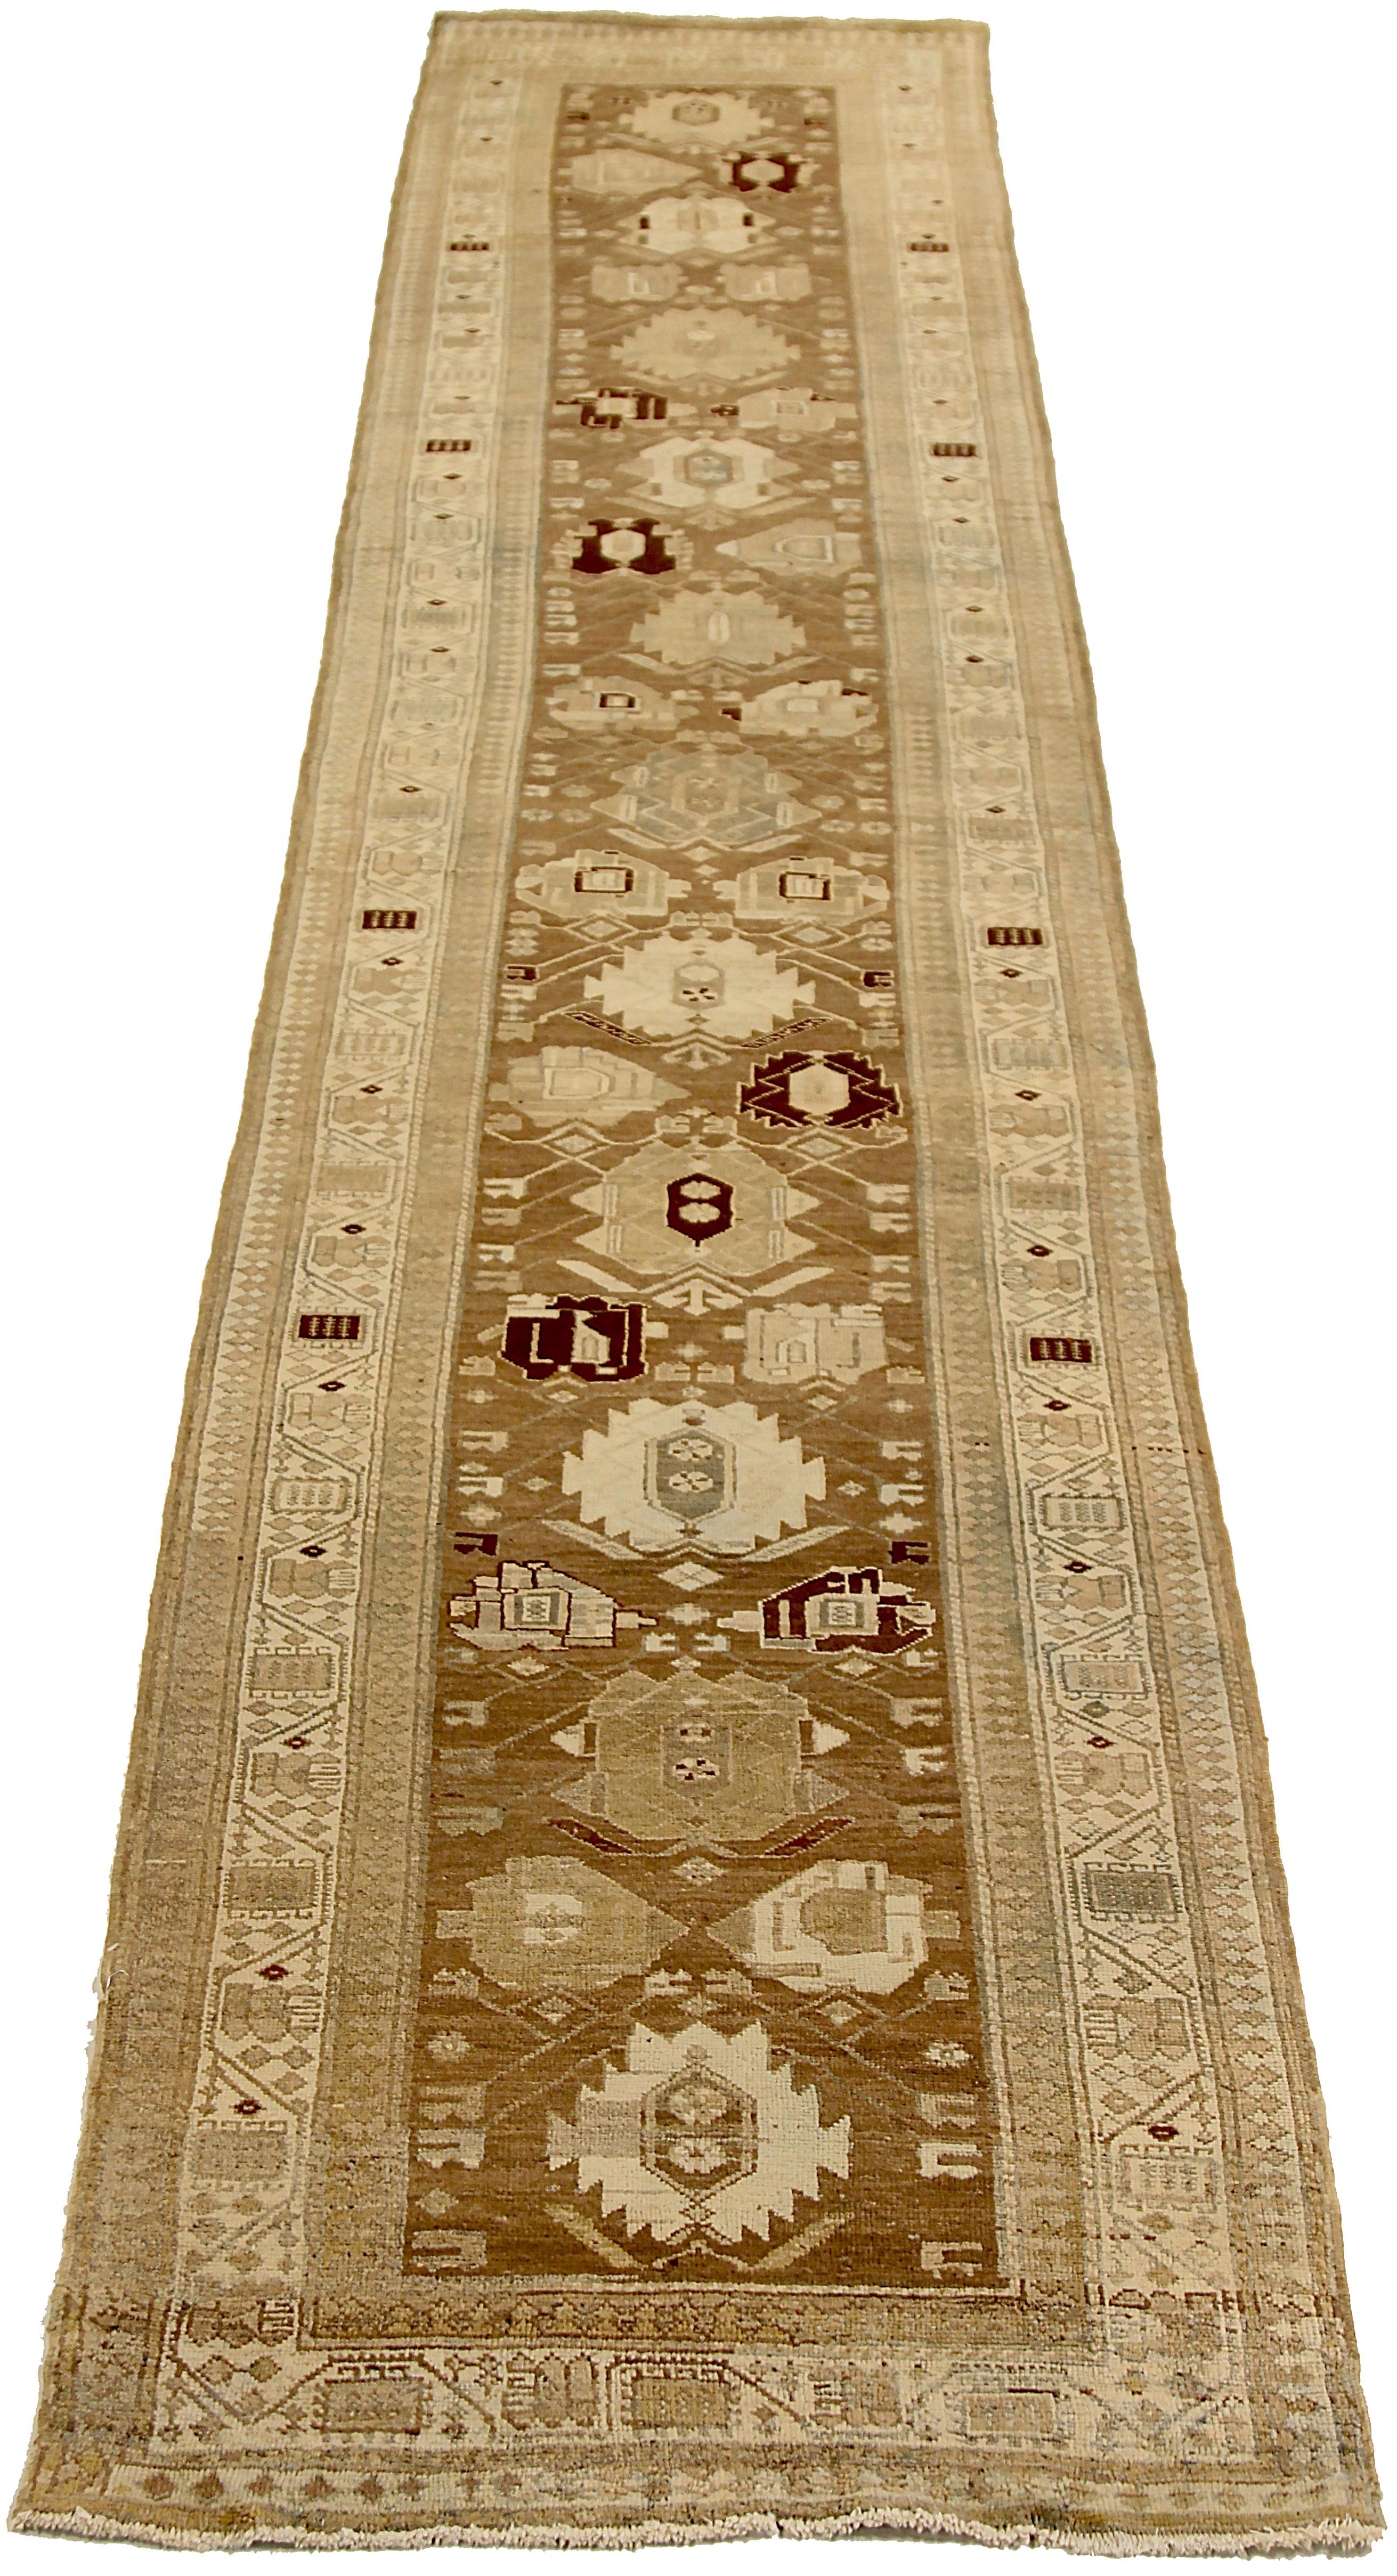 Antique Persian runner rug handwoven from the finest sheep’s wool and colored with all-natural vegetable dyes that are safe for humans and pets. It’s a traditional Heriz design featuring a lovely brown field covered with ivory floral and tribal